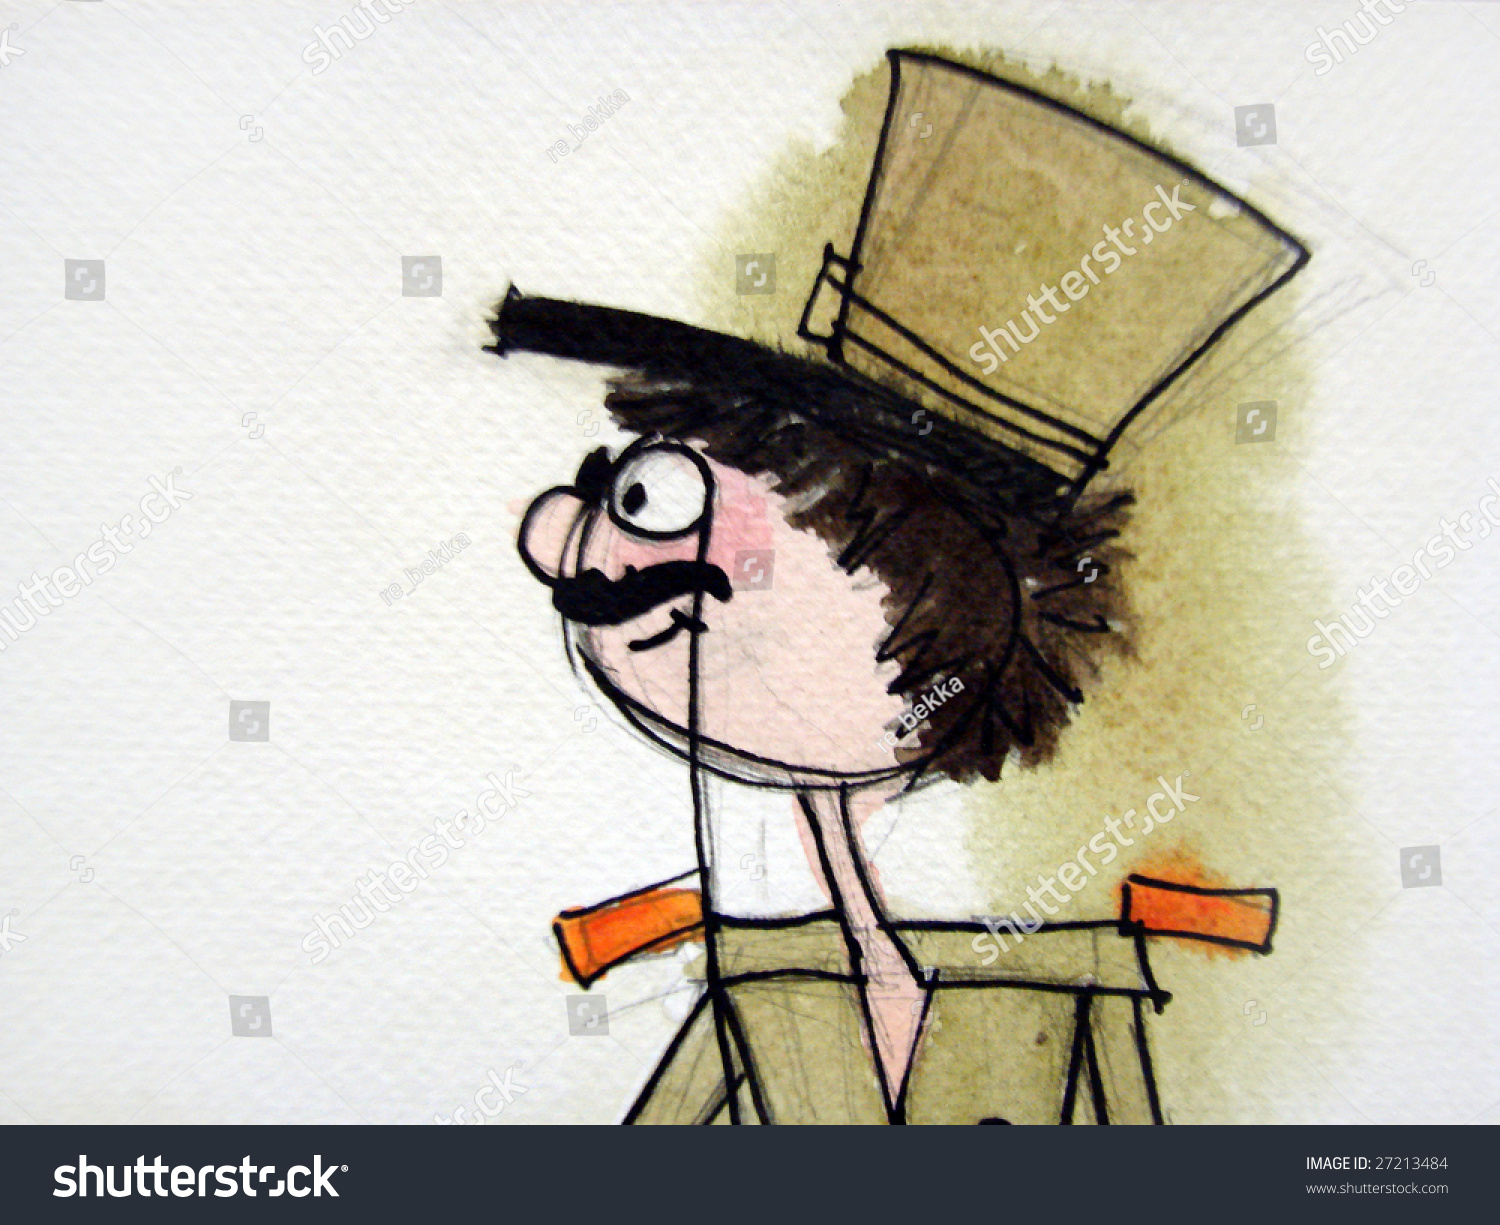 Illustrated Soldier | Drawing Stock Photo 27213484 : Shutterstock